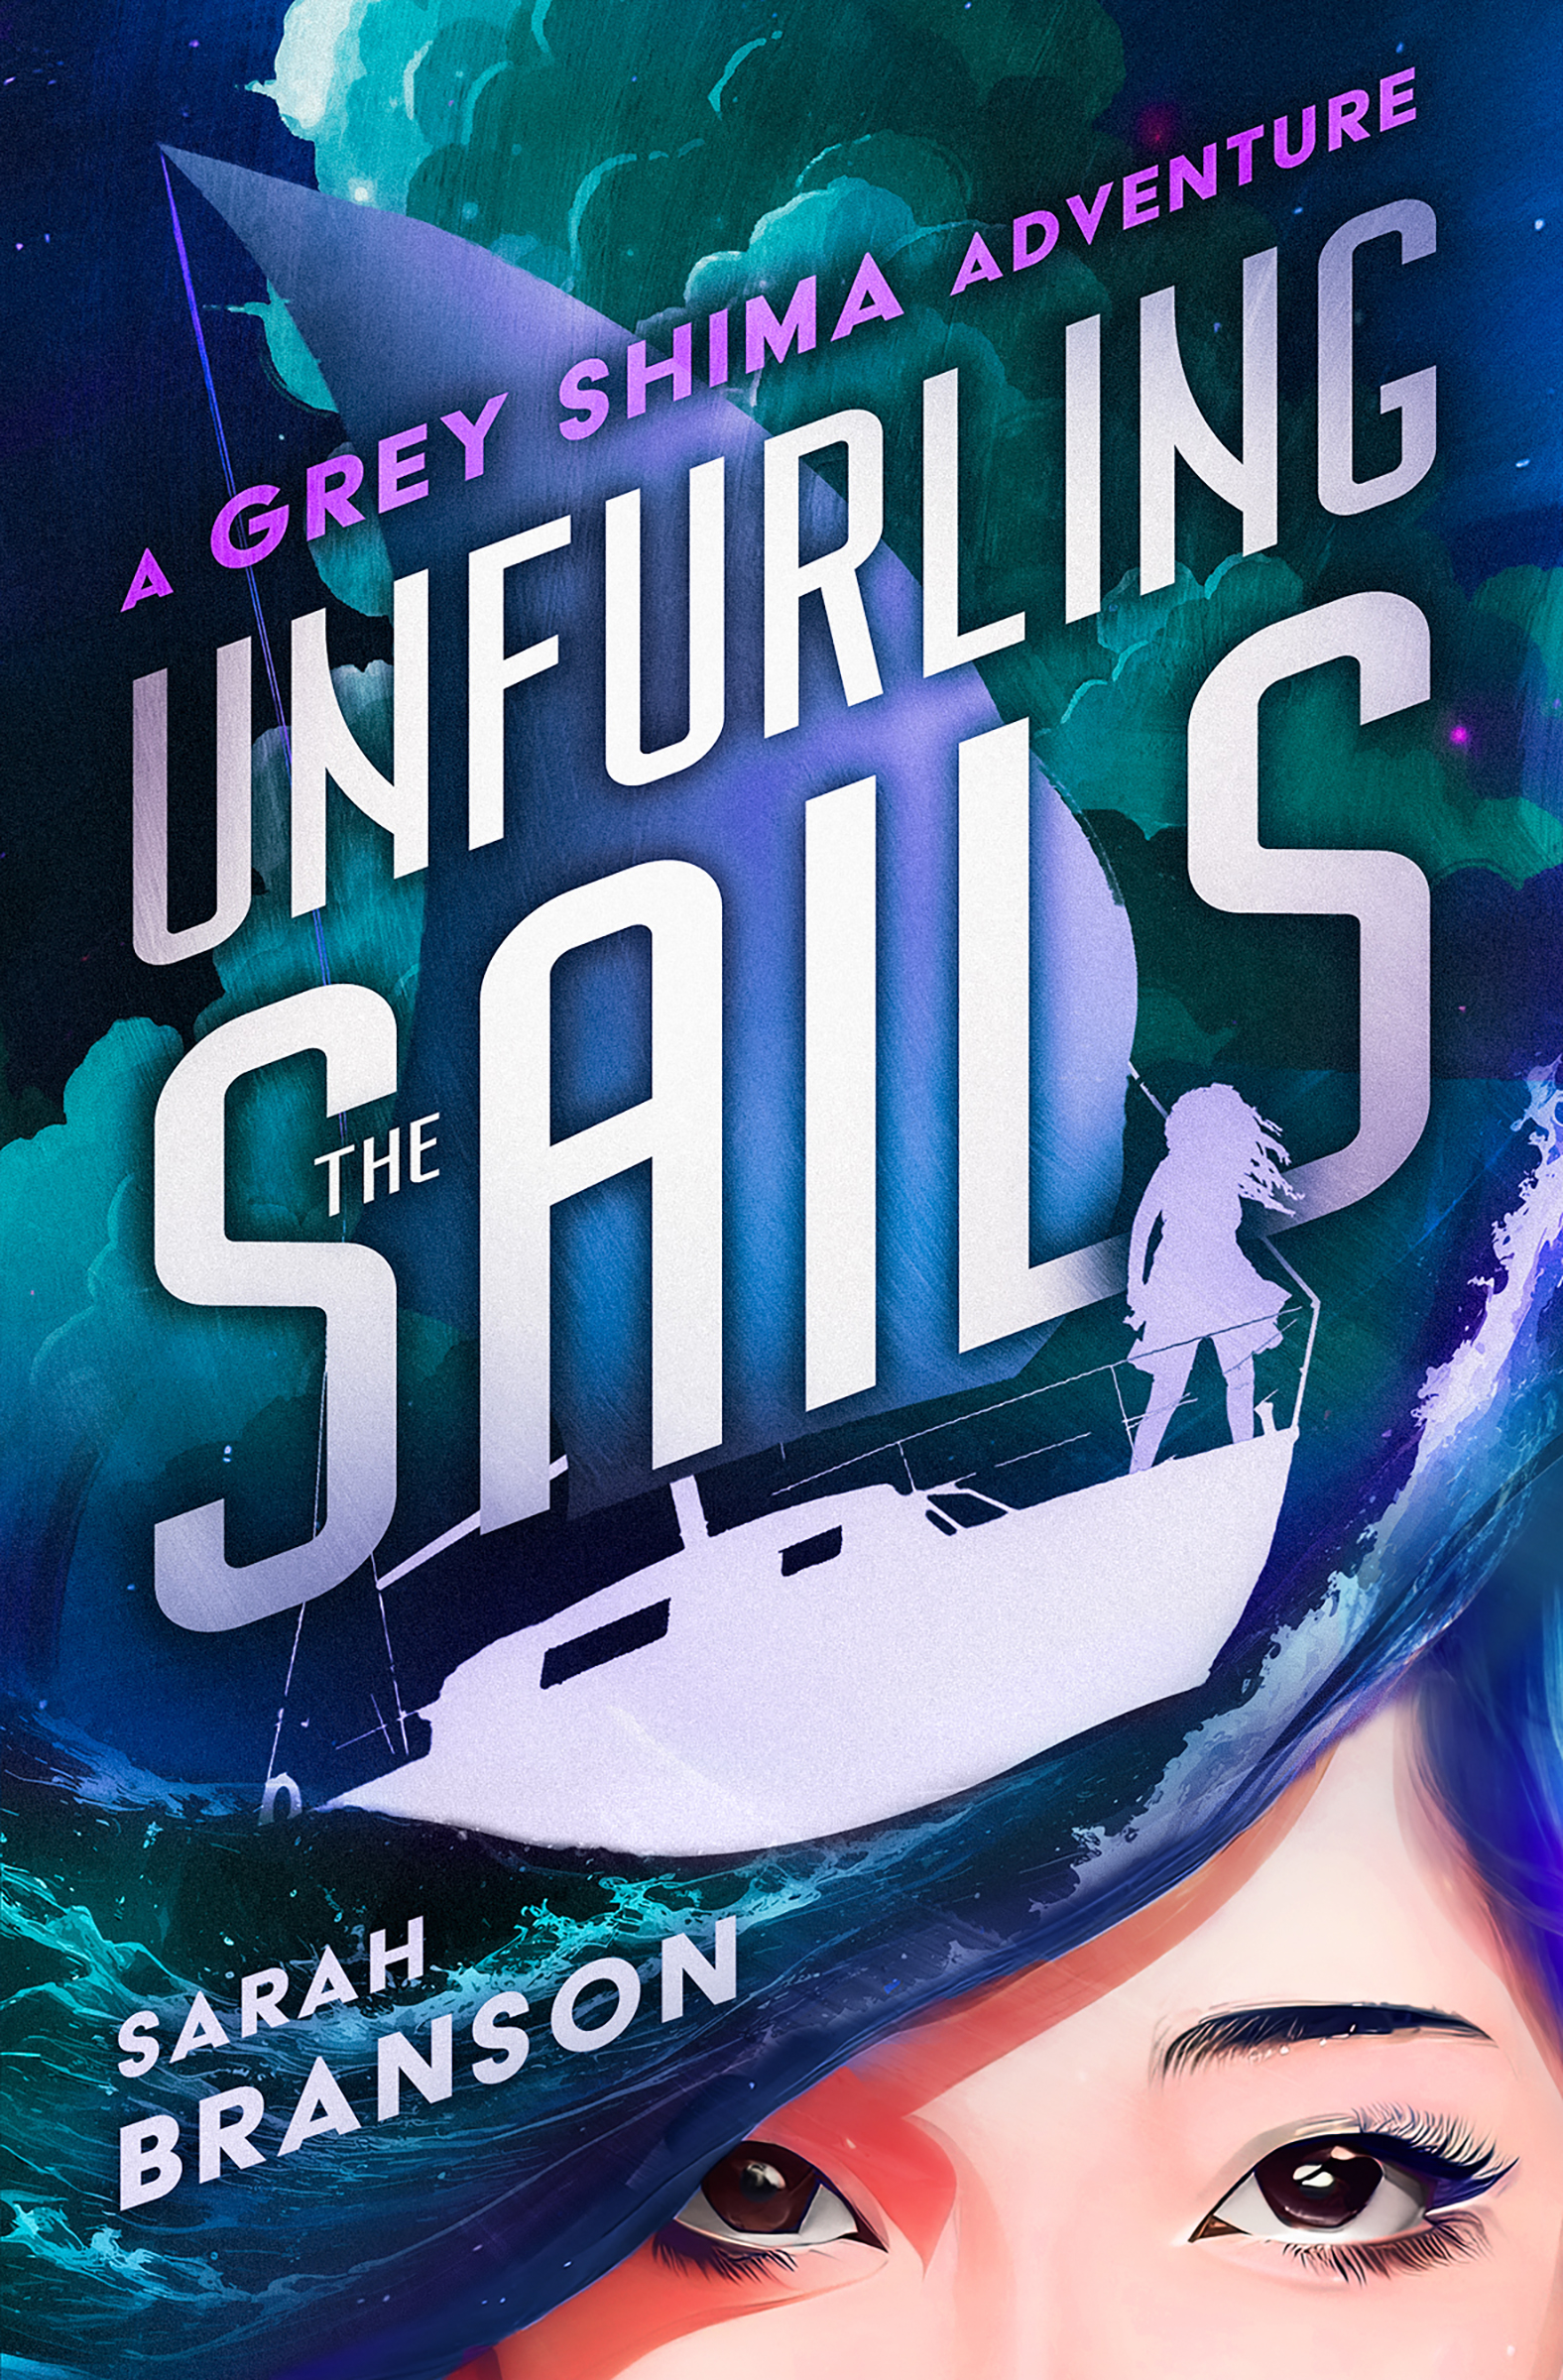 Unfurling the Sails by Sarah Branson